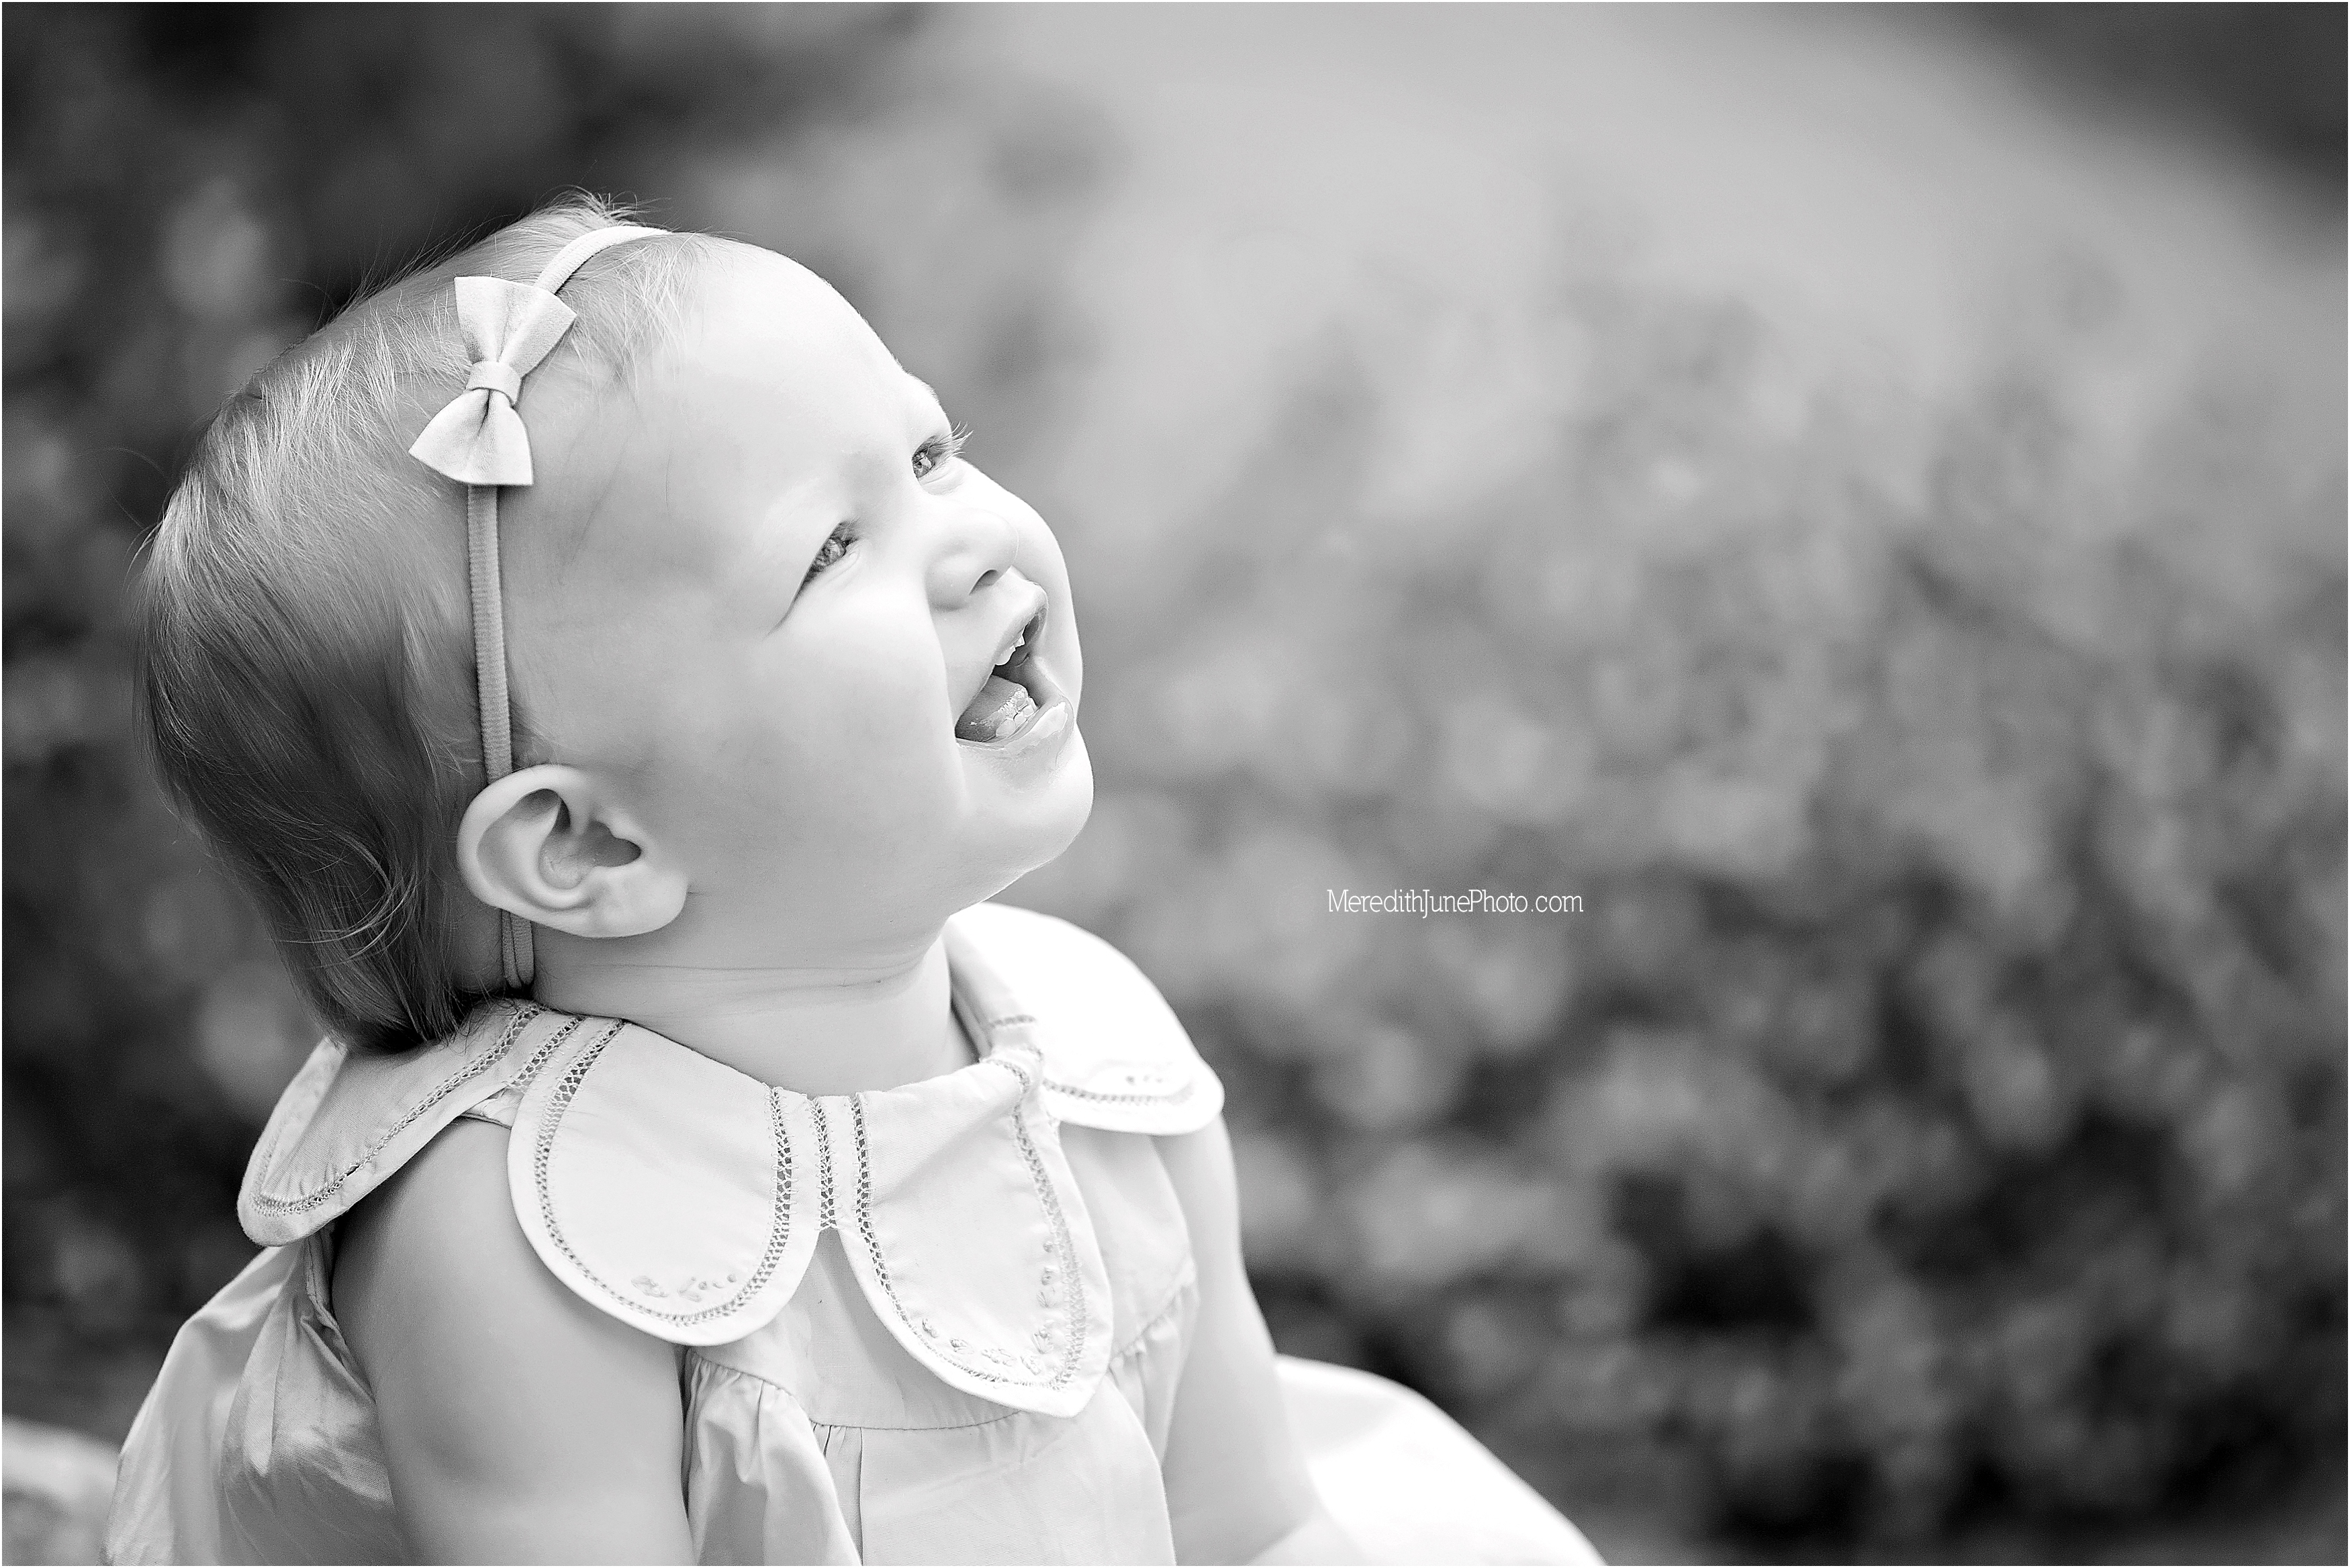 Beaitful outdoor garden photo session for baby girl